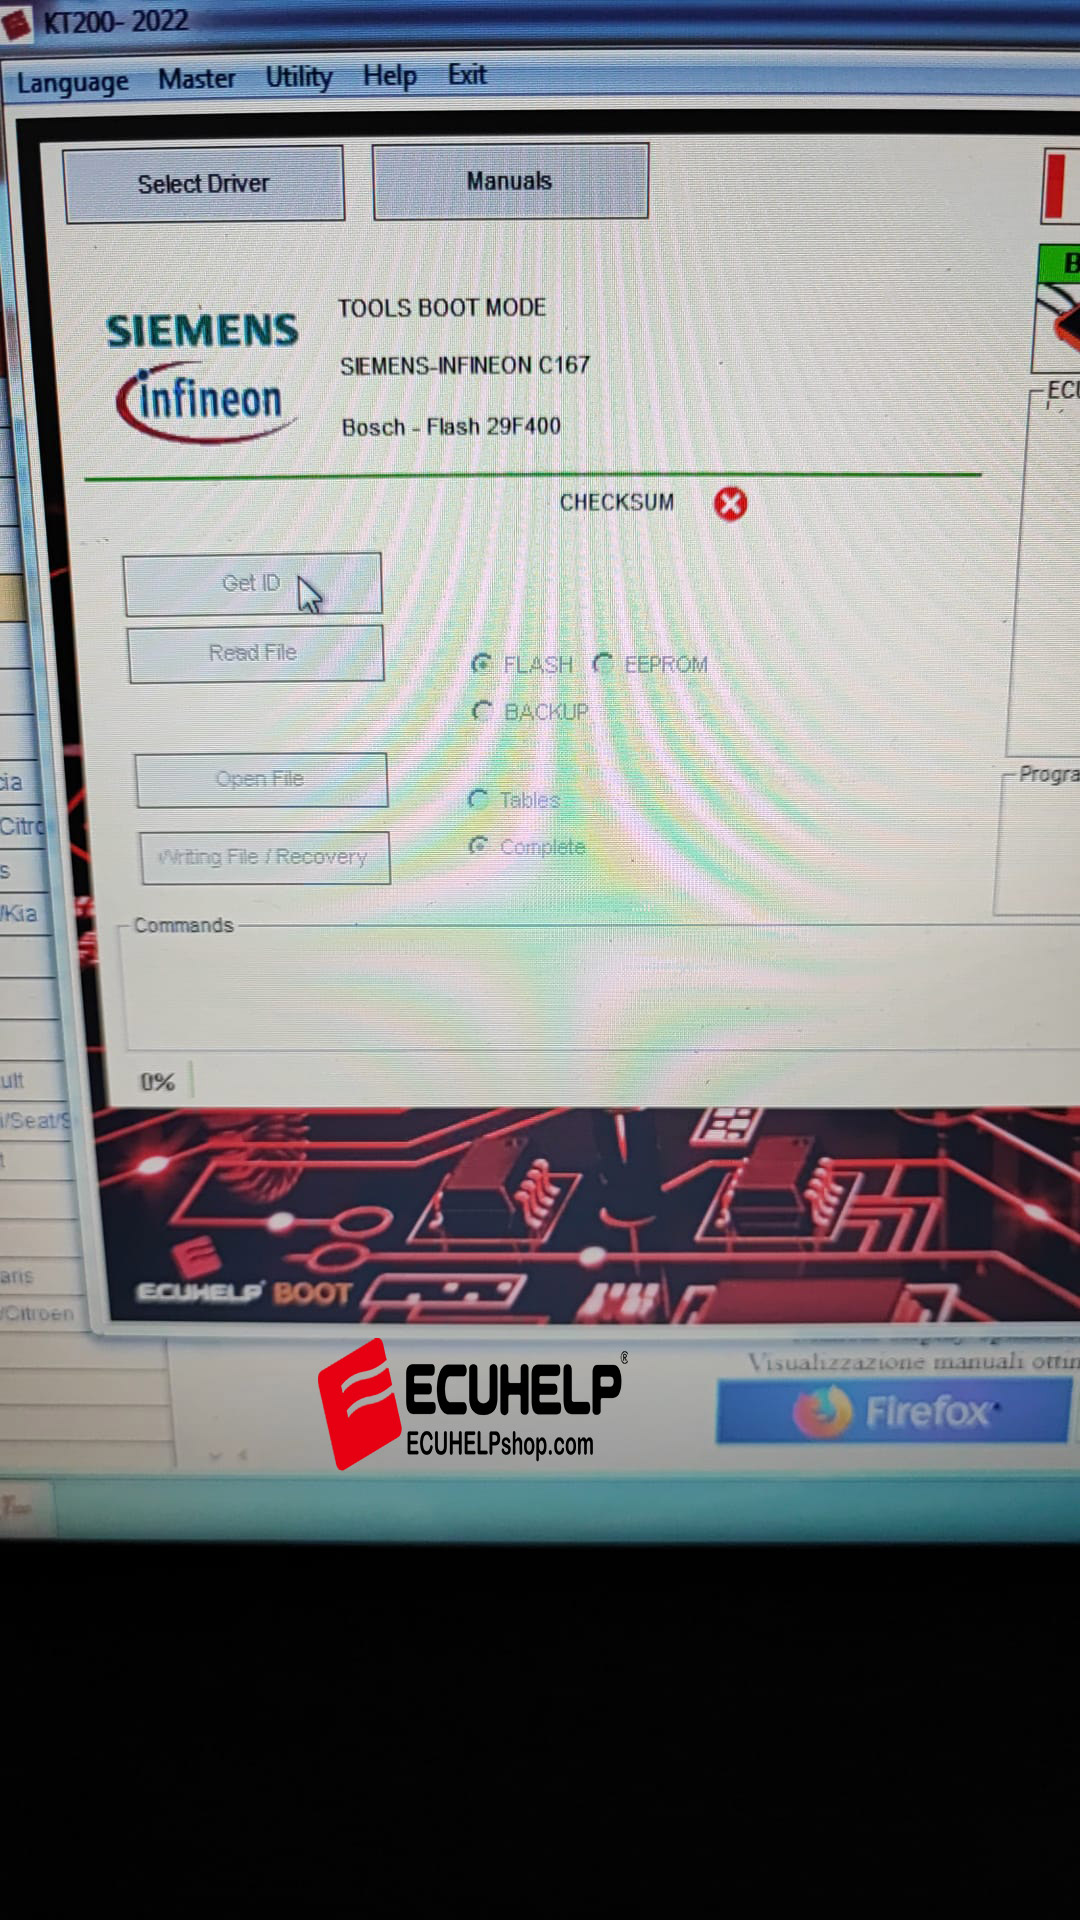  ECUHELP KT200 driver stay gray solution